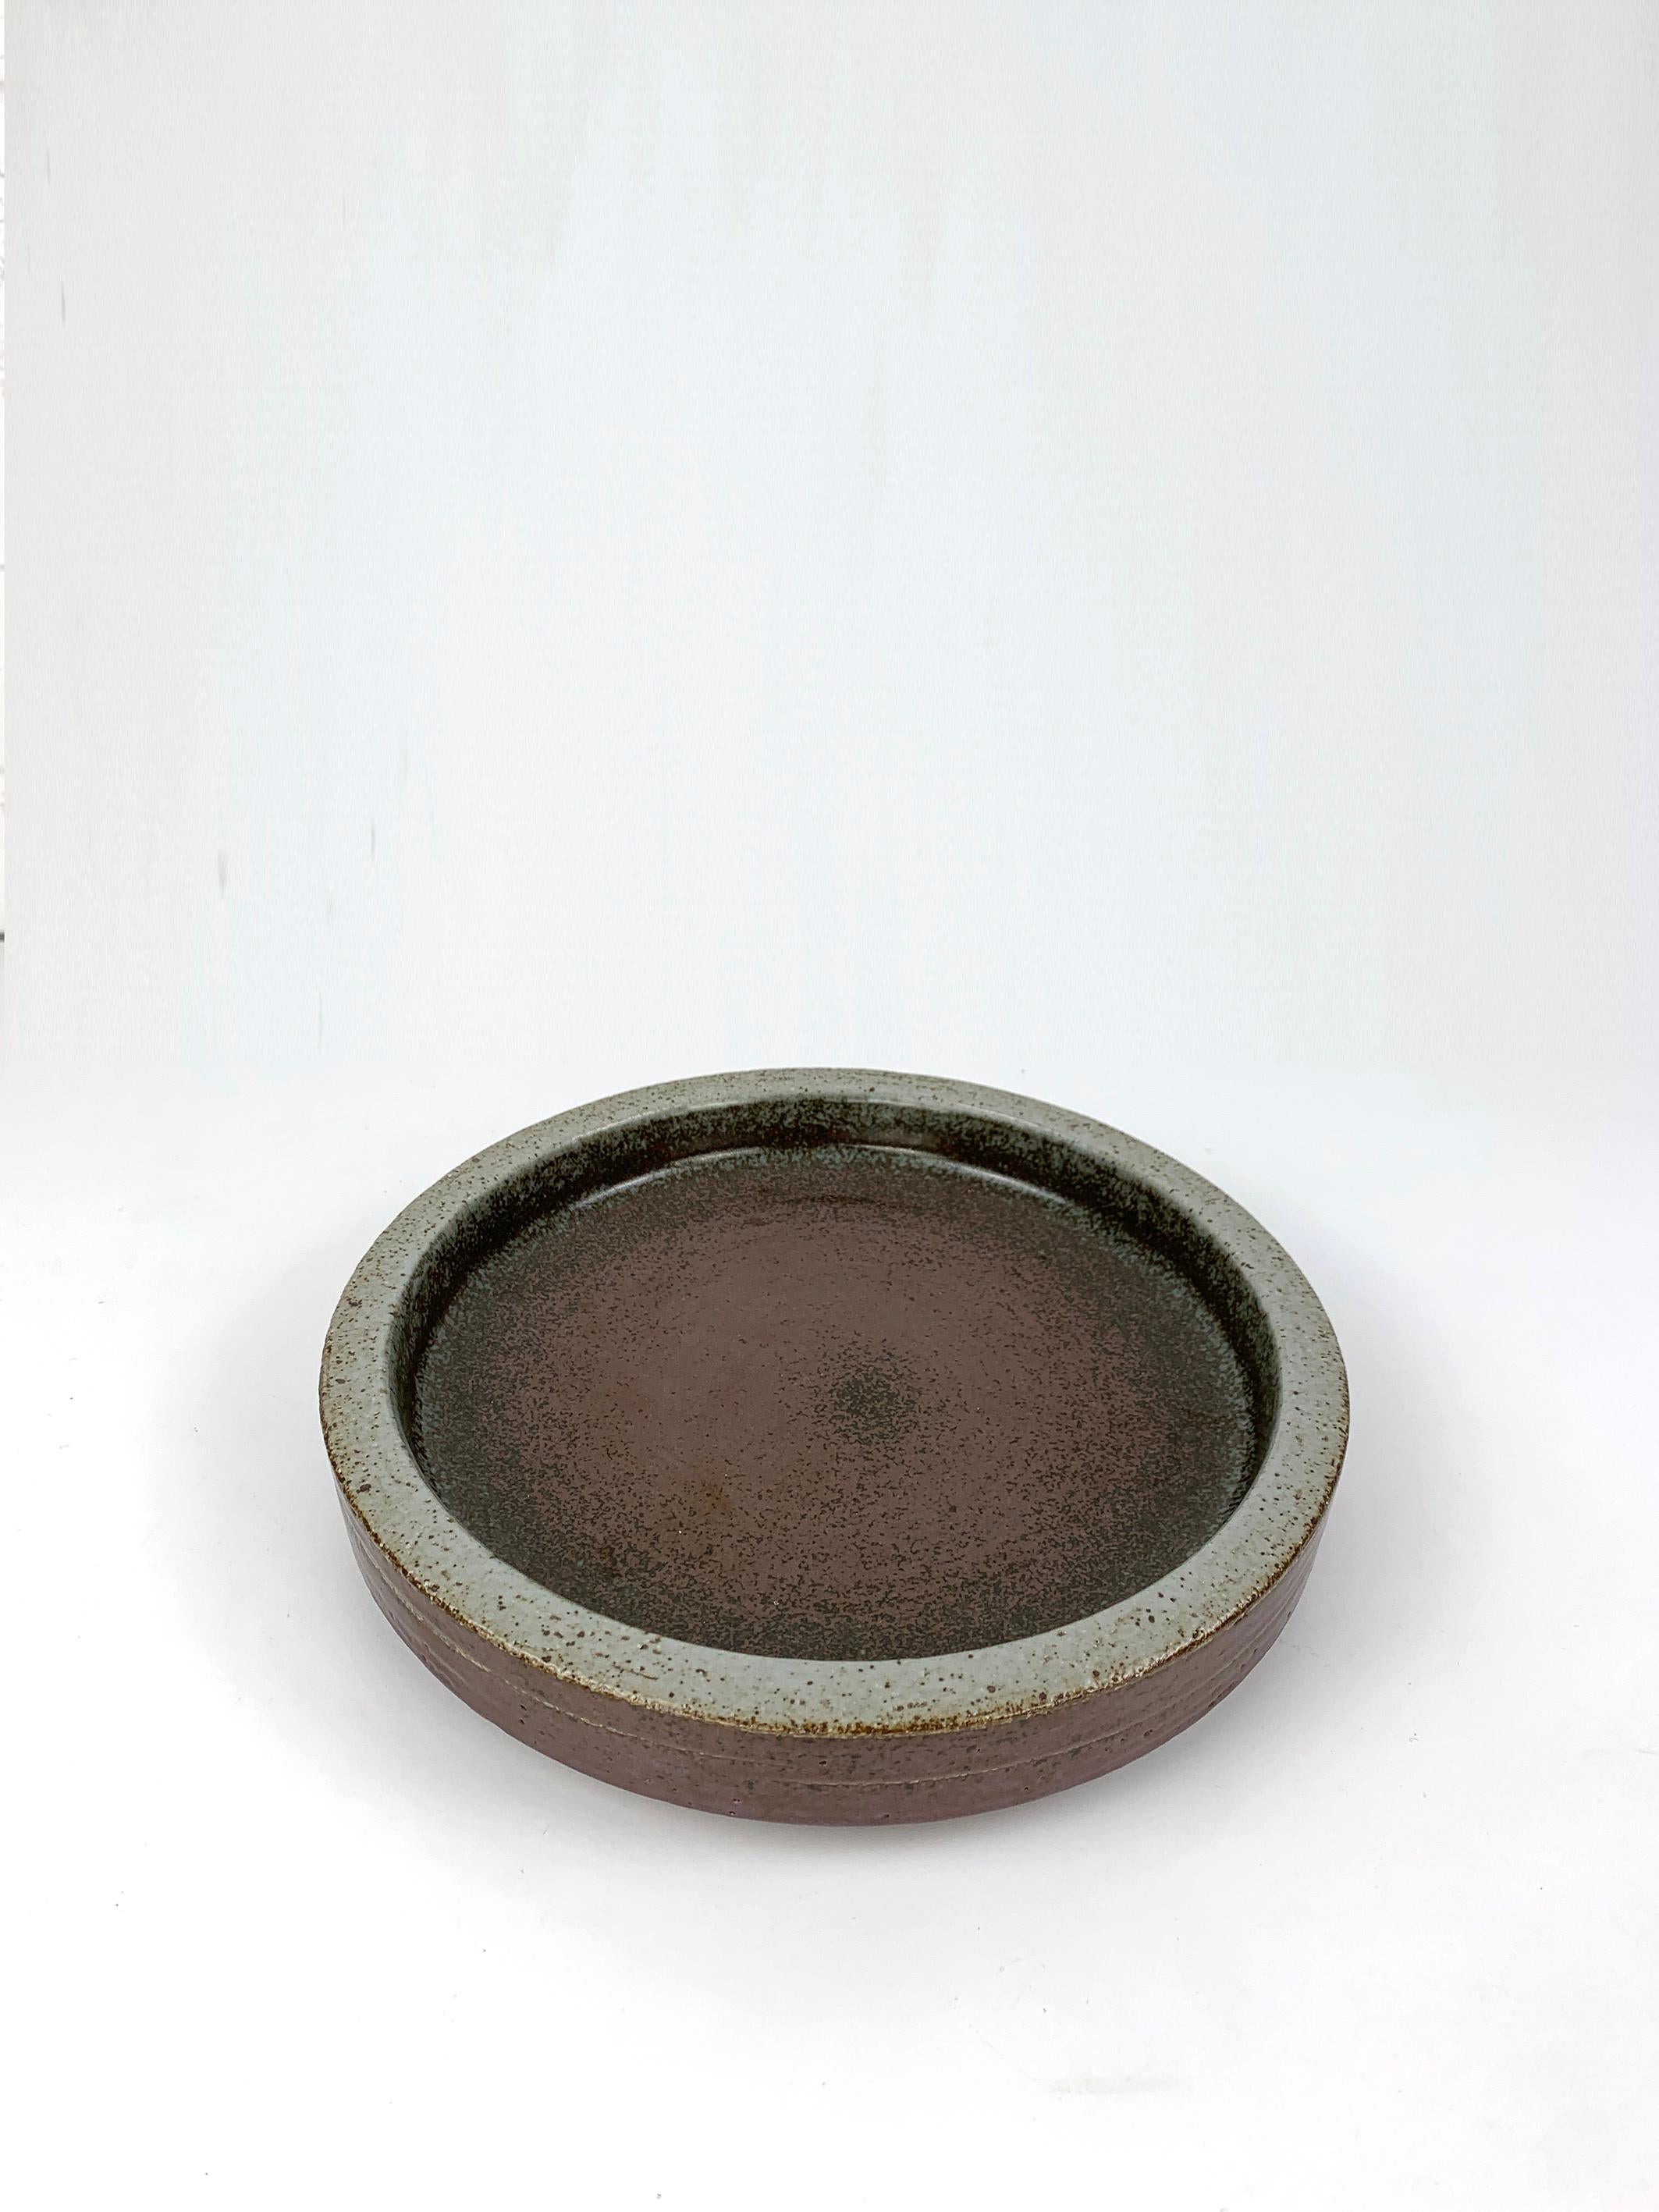 Large round ceramic vide-poche or low bowl in earth tones beige-grey brown. 

Scandinavian Mid-Century 1960s, produced by Palshus (Denmark), founded by Per and his wife Annelise Linnemann-Schmidt. 

The couple created and produced chamotte (danish